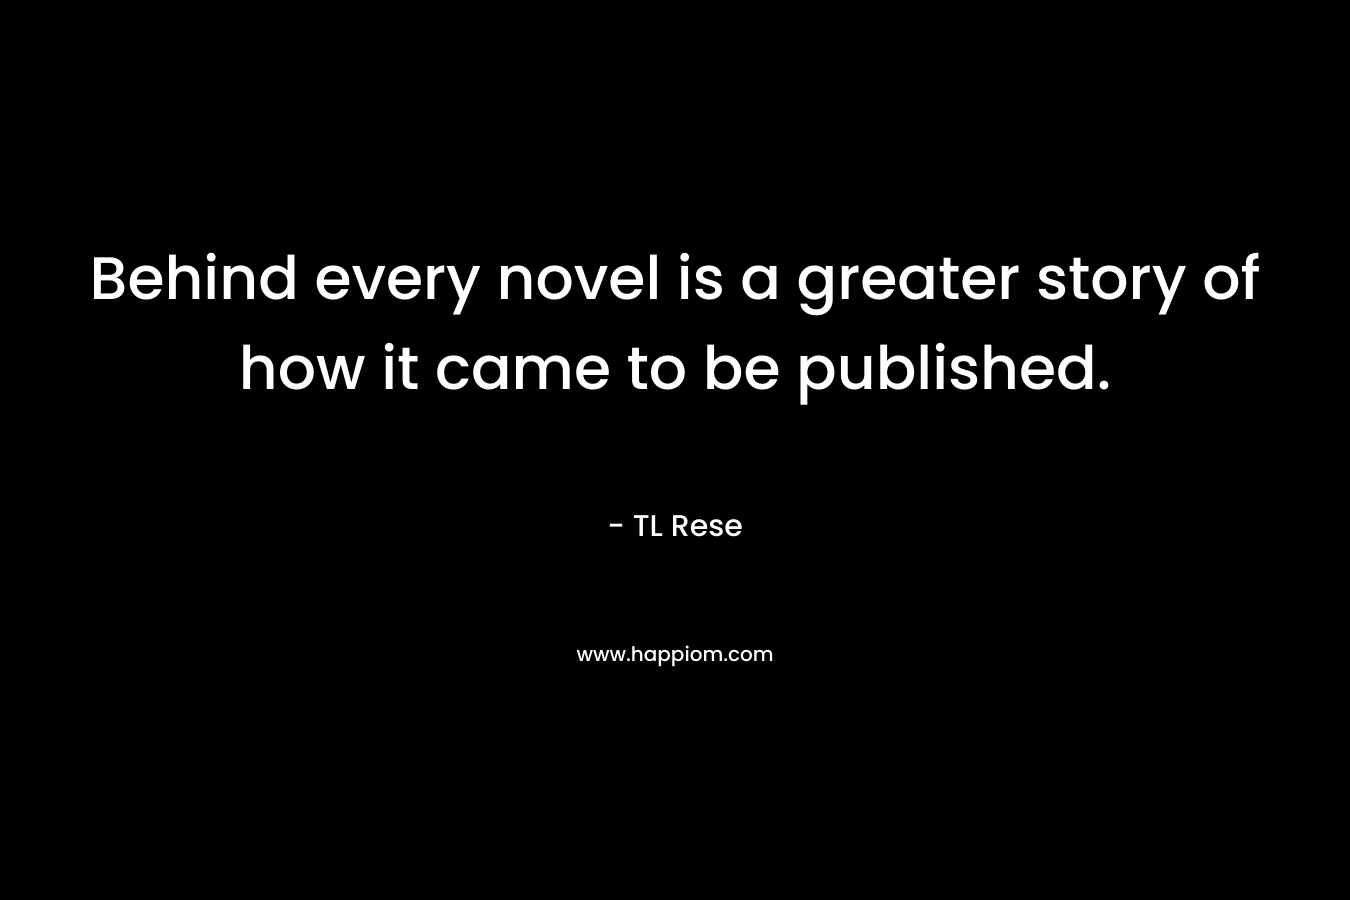 Behind every novel is a greater story of how it came to be published.